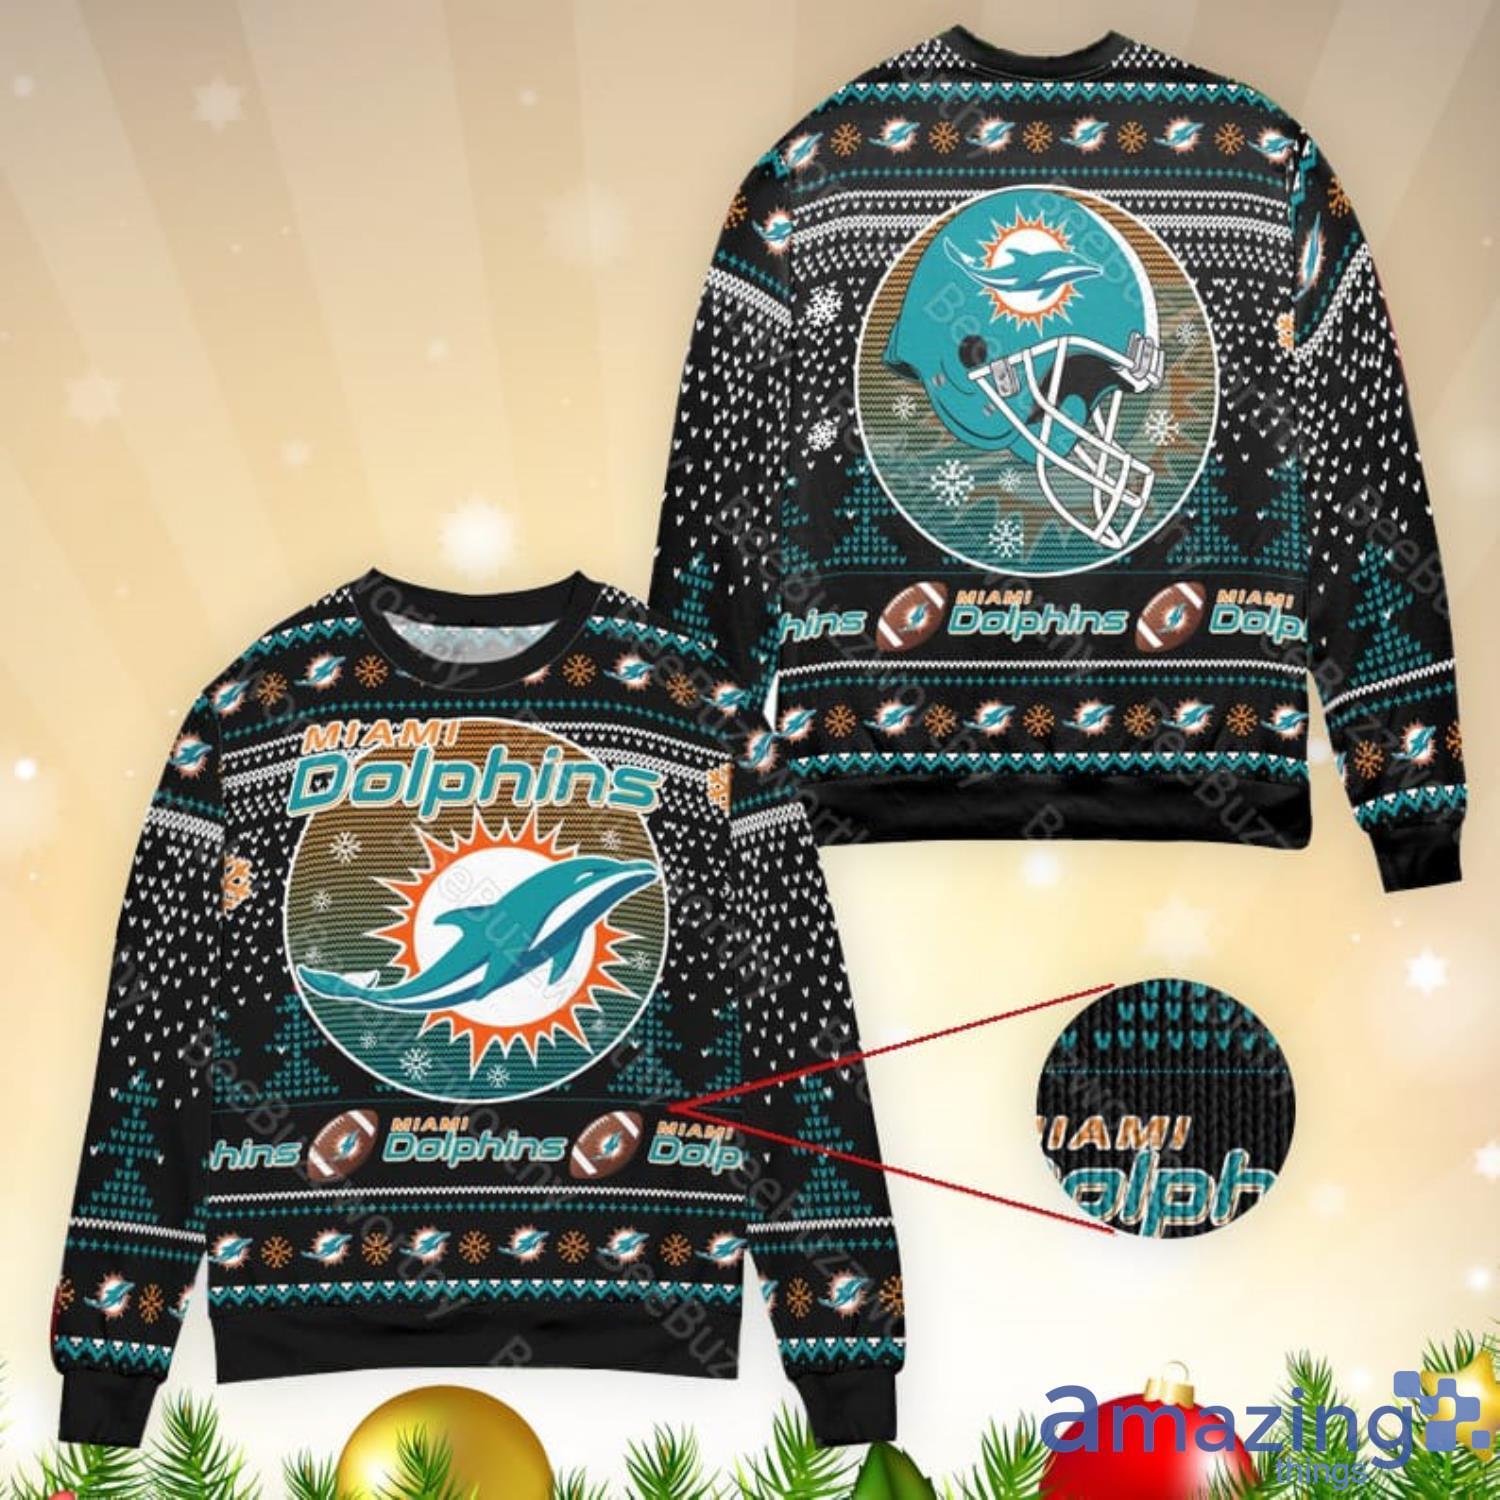 Miami Dolphins Fans Ugly Christmas Sweaters Product Photo 1